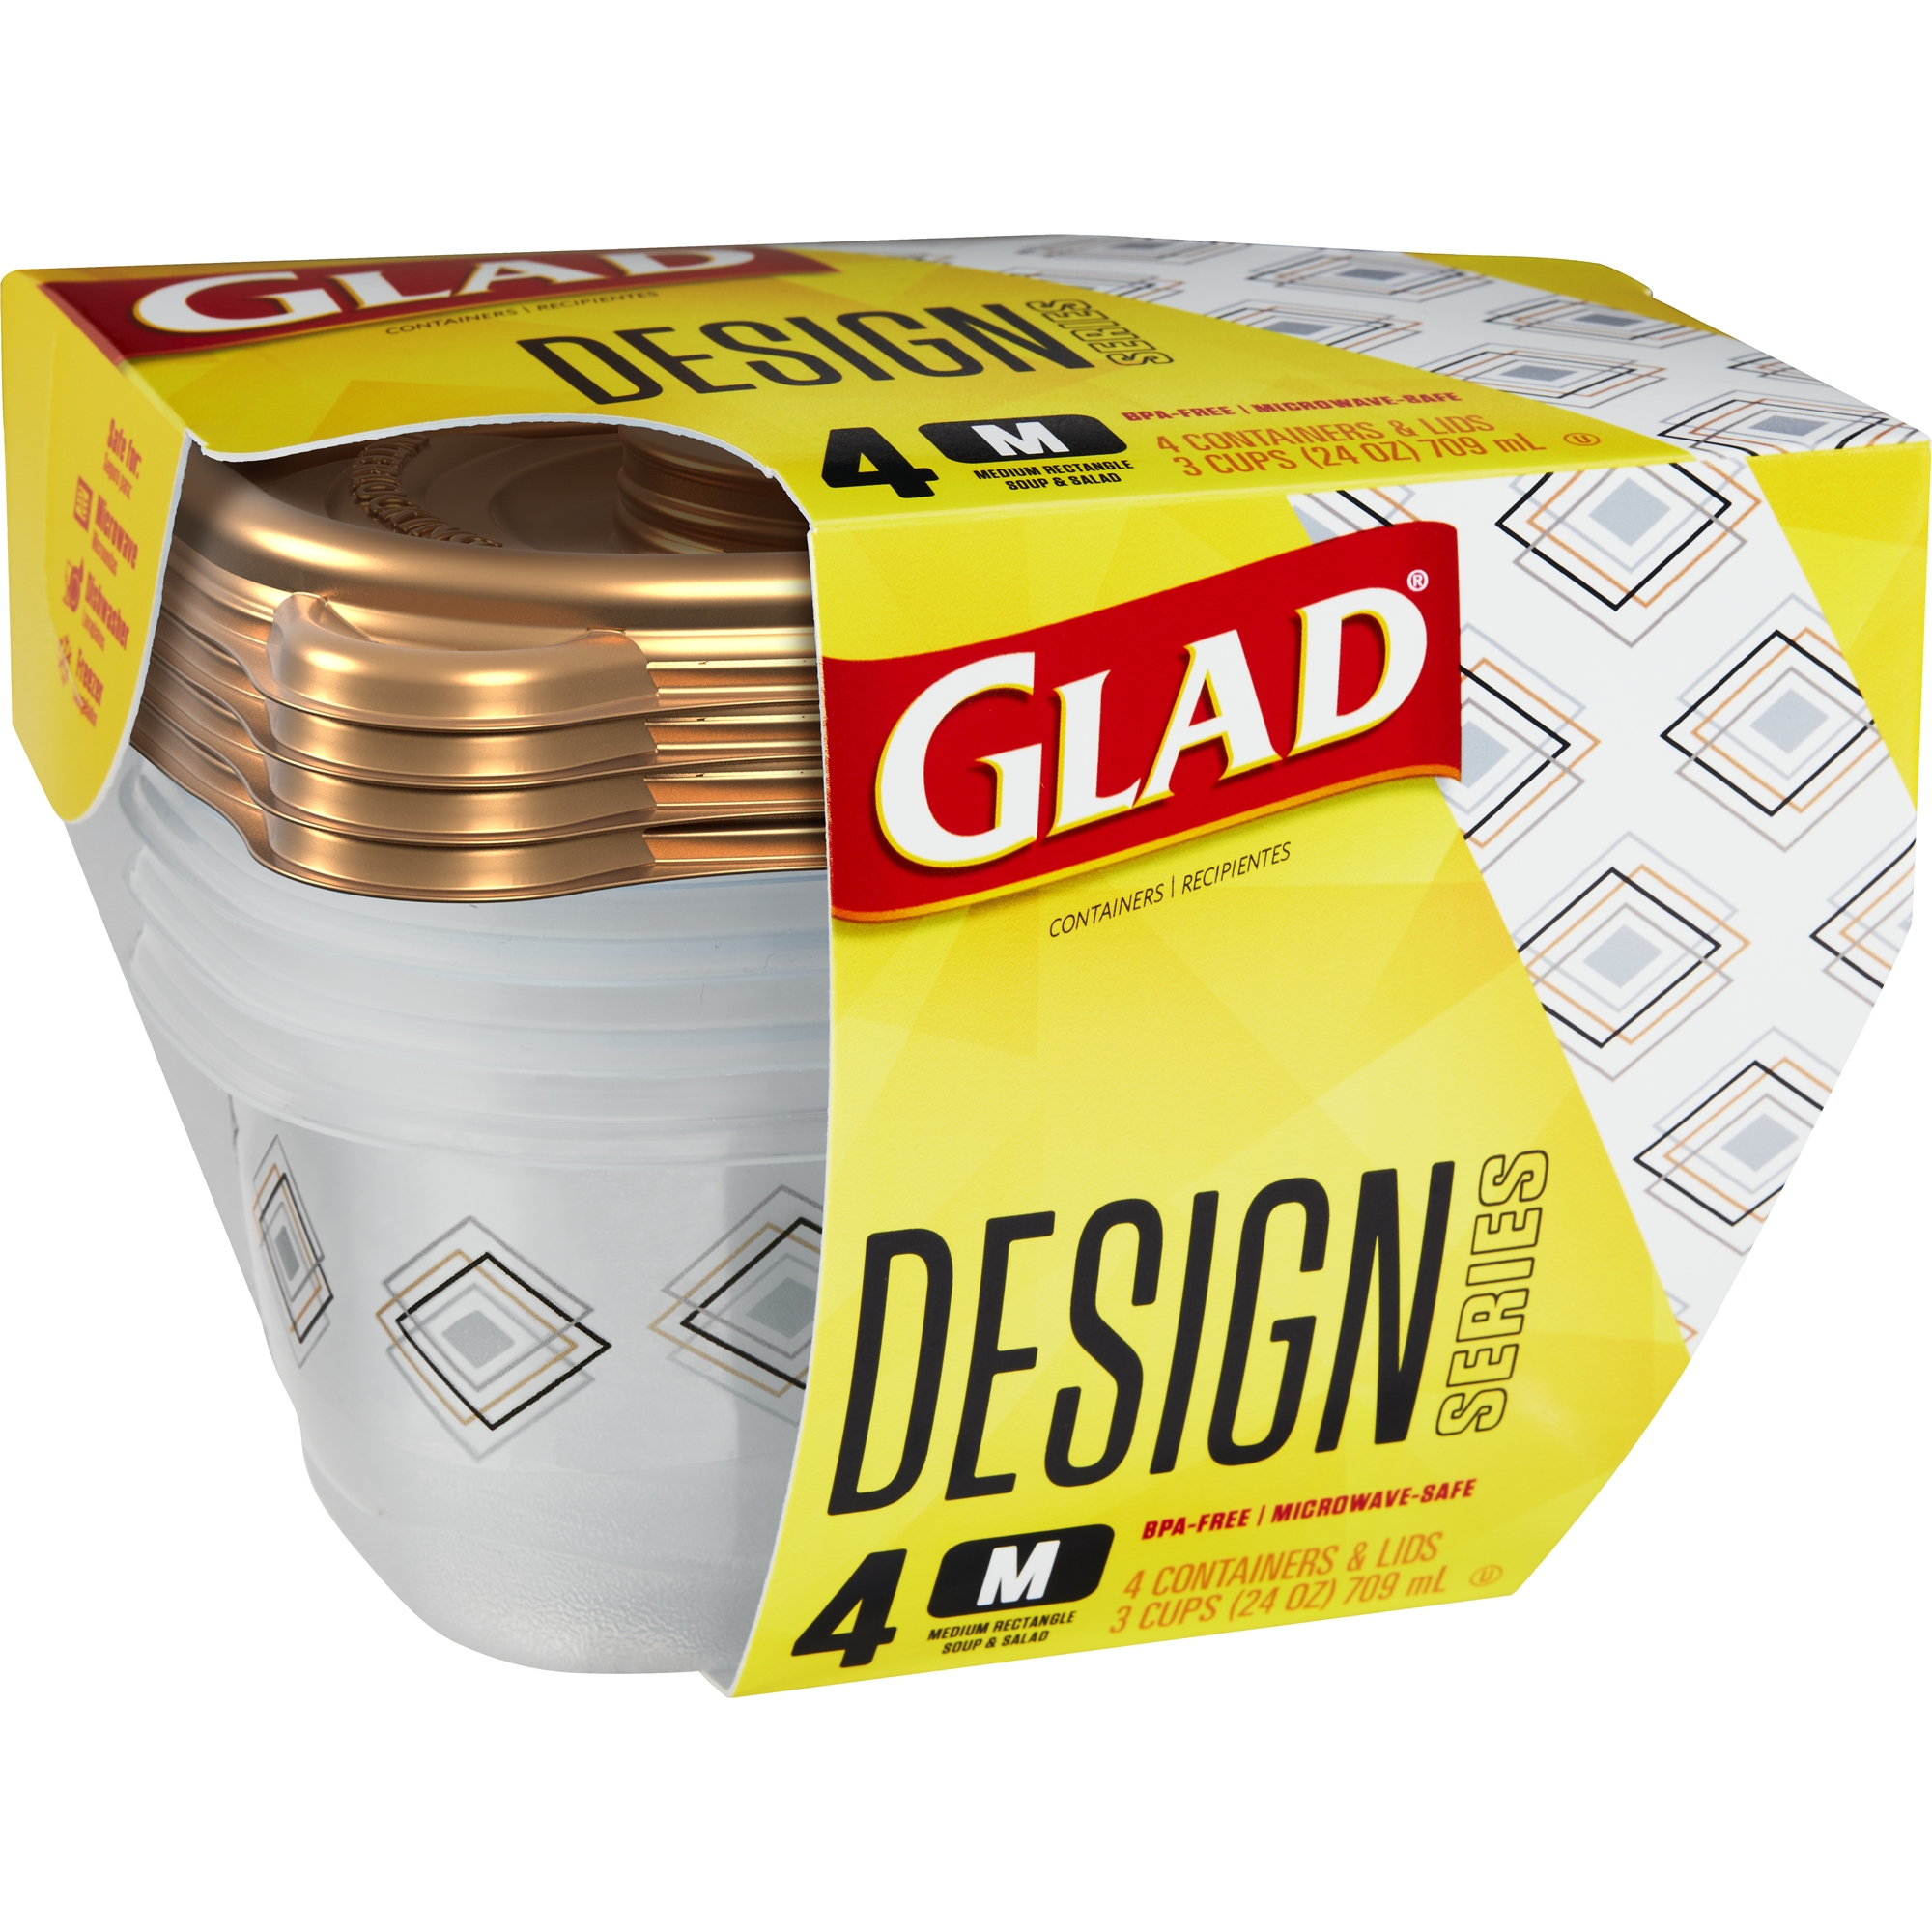 Glad Food Storage Containers - Designer Series Medium Rectangle Container - 24 oz - 4 Containers - image 2 of 5